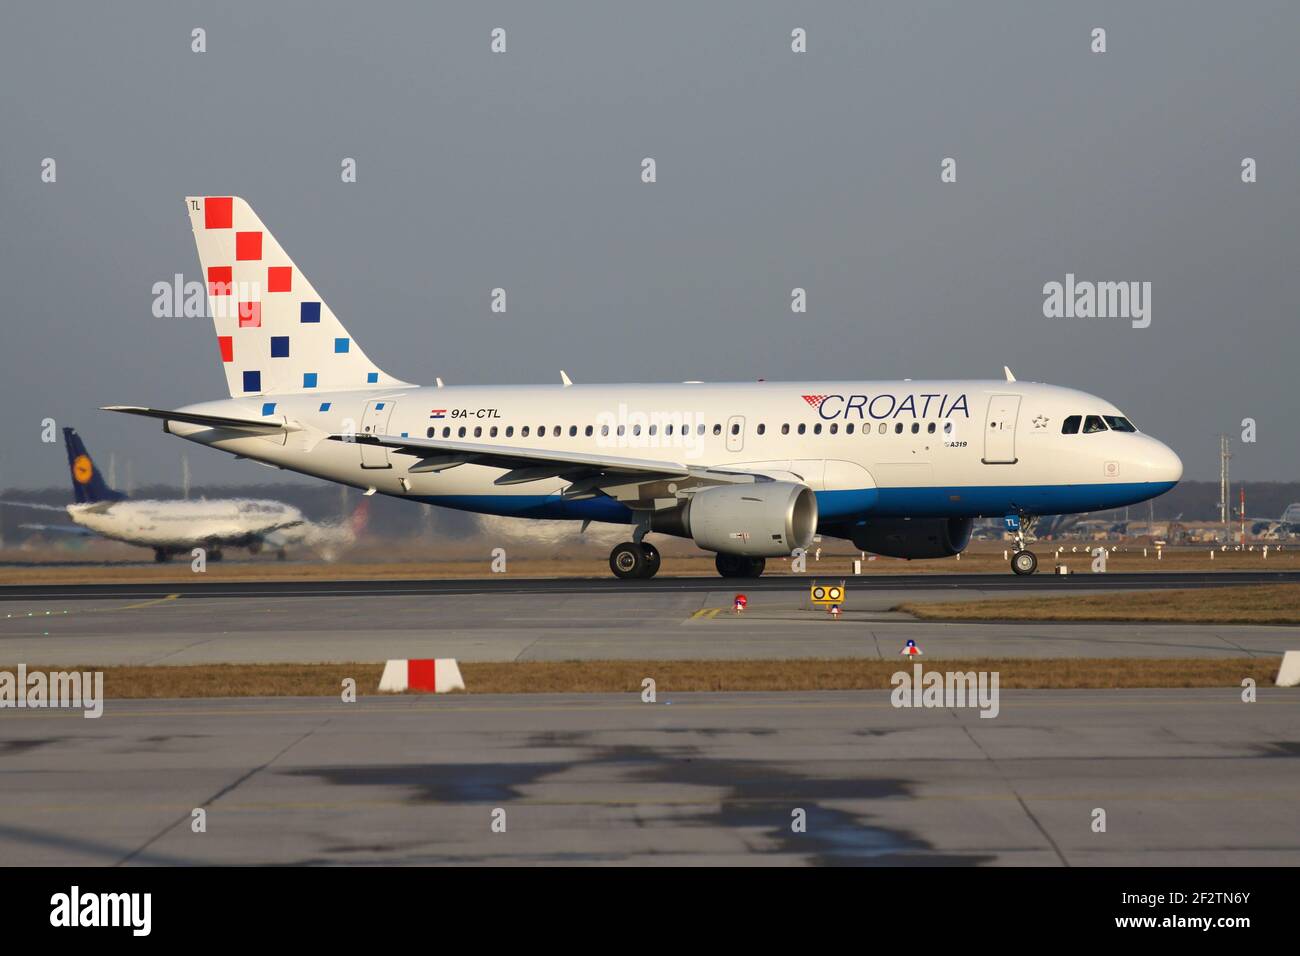 Croatia Airlines Airbus A 319-100 with registration 9A-CTL lining up runway 18 (called Startbahn West) of Frankfurt Airport. Stock Photo